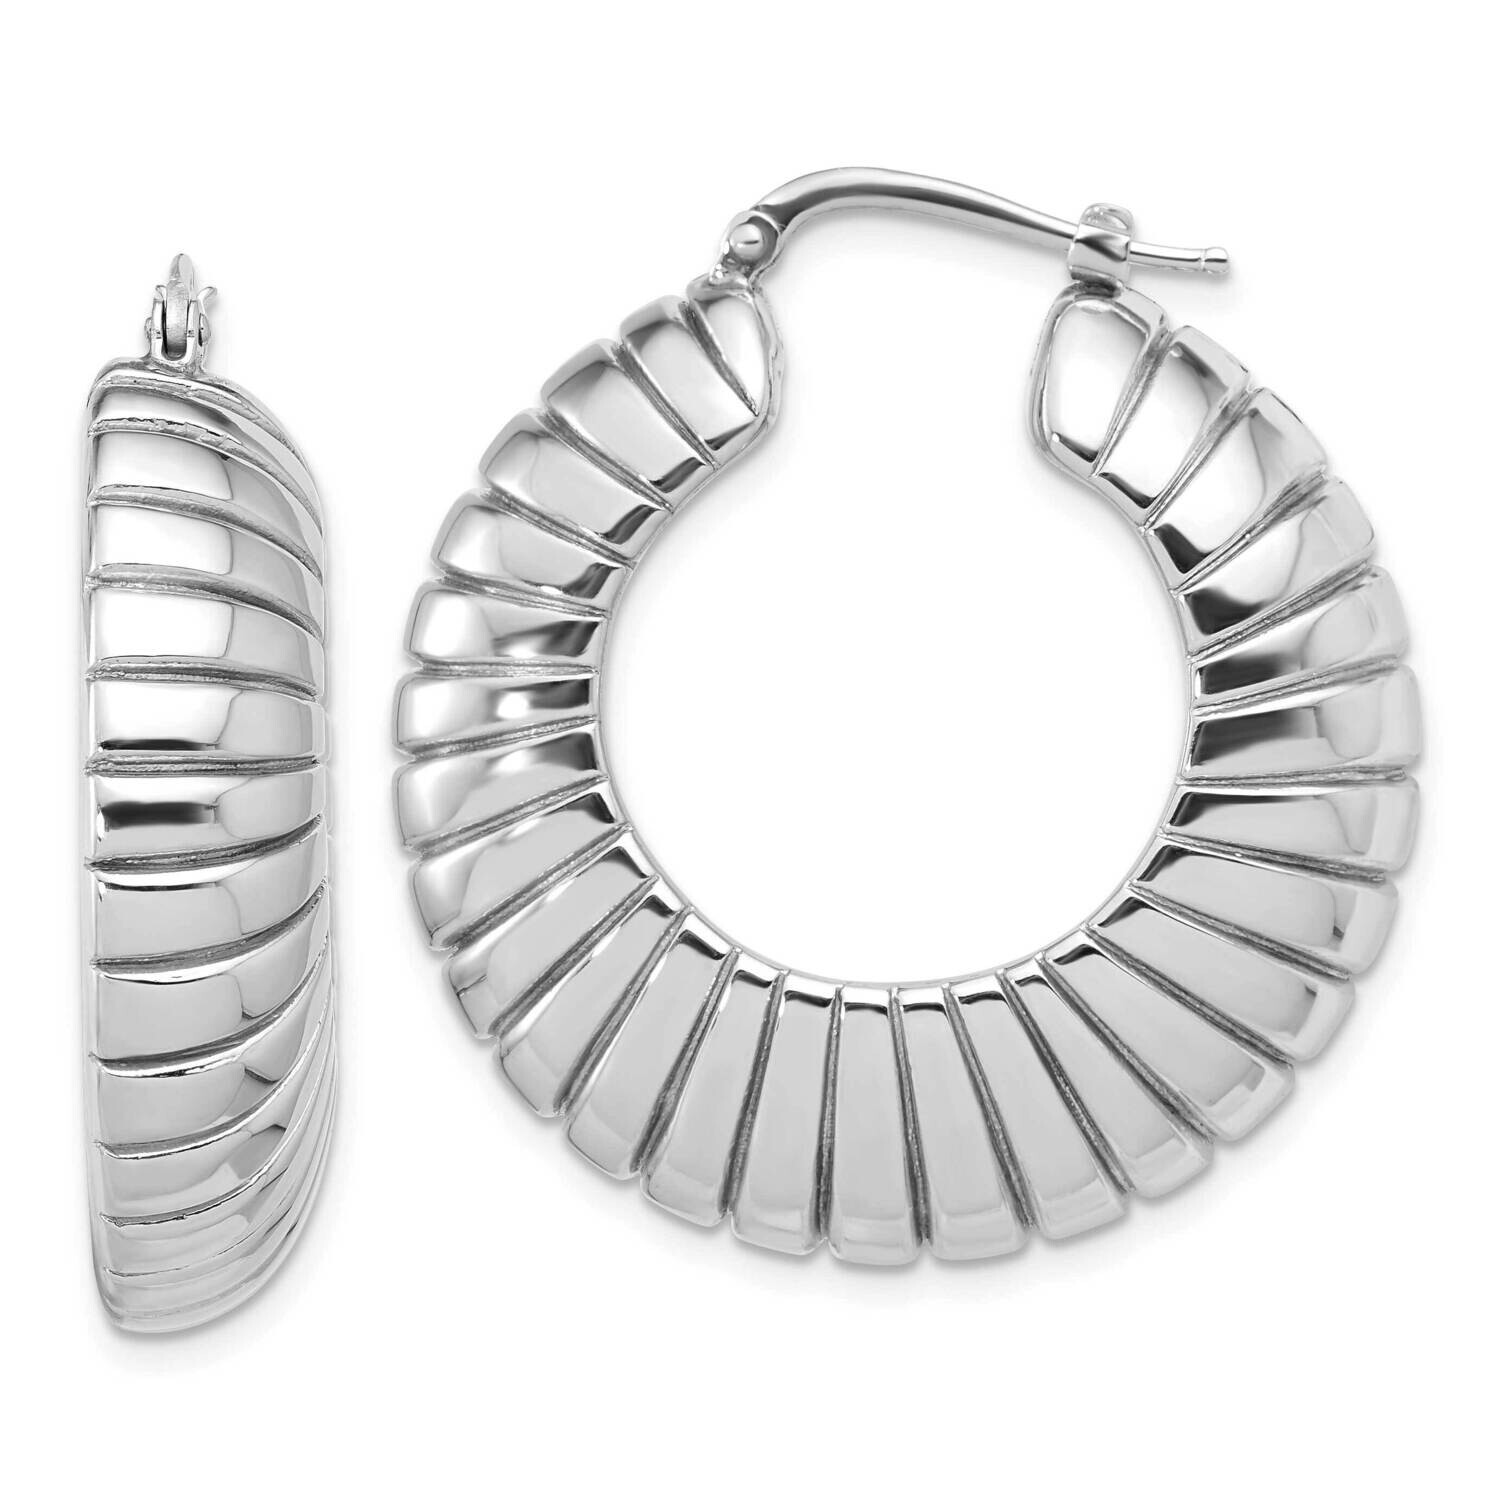 Rh-Plated Polished Striped Large Round Hoop Earrings Sterling Silver QE16914